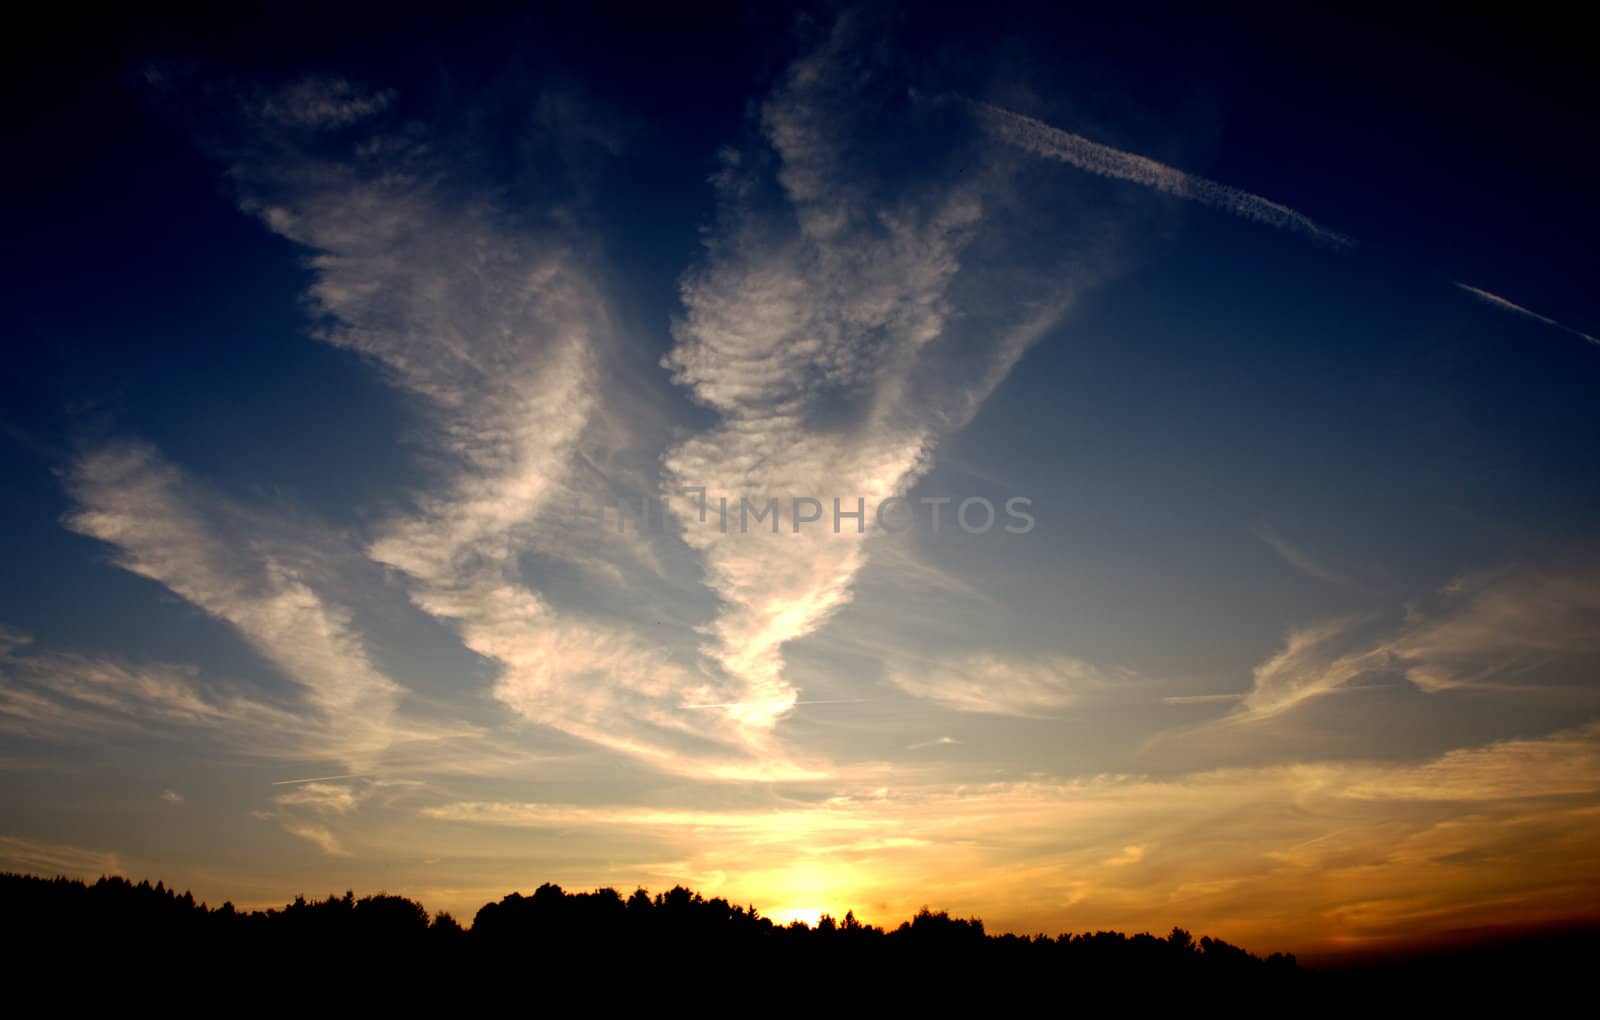 the sunset with lines of planes by renales